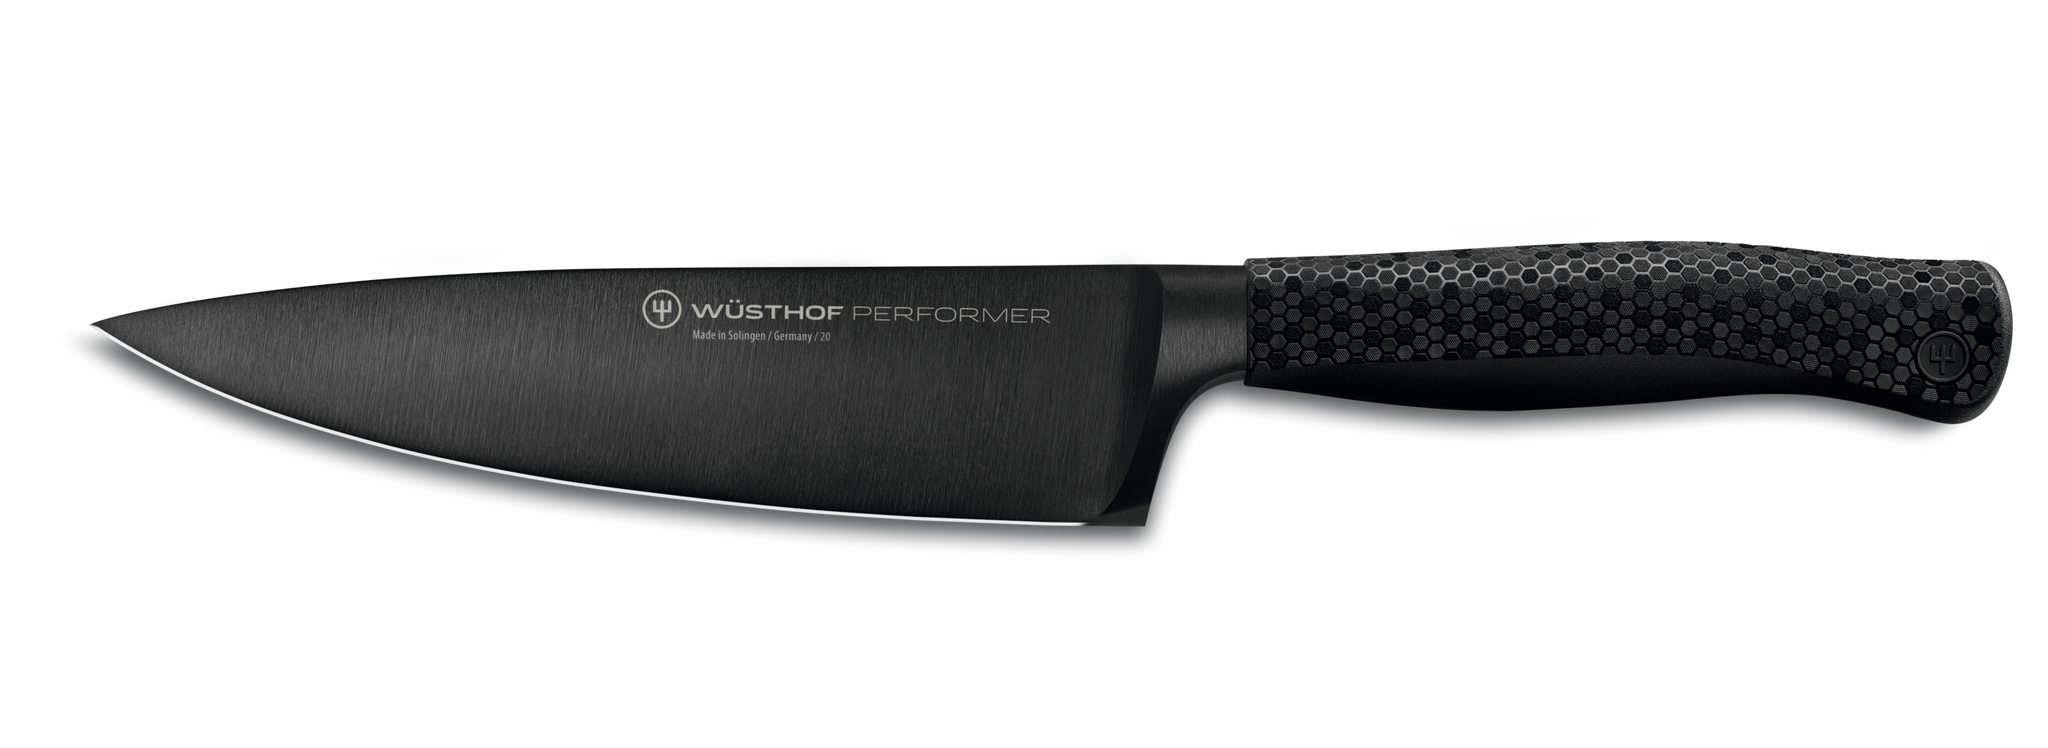 Performer 6" Chef's Knife